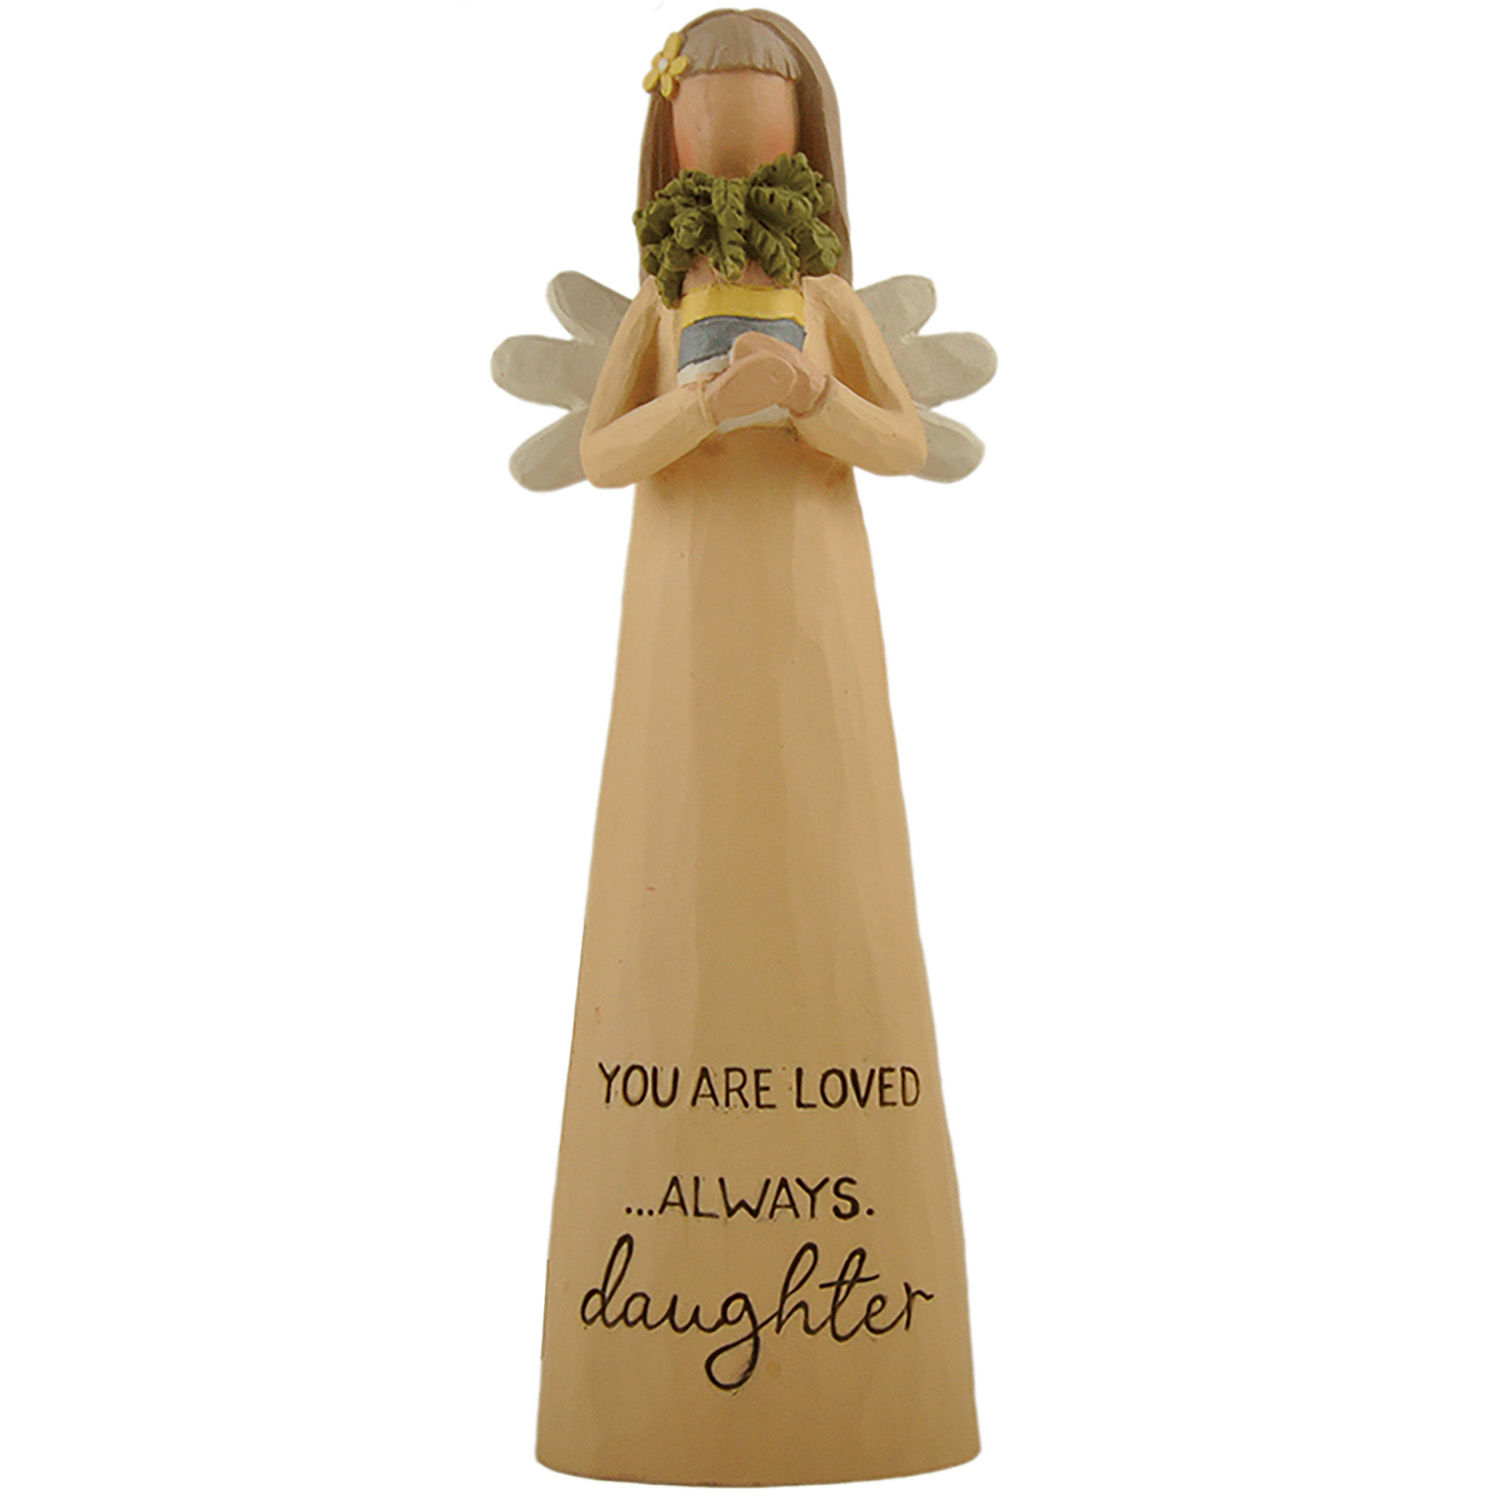 New Design Resin Angel Crafts Bright Blessings Angel Figurine w flower - Daughter for Home Decoration  231-13578